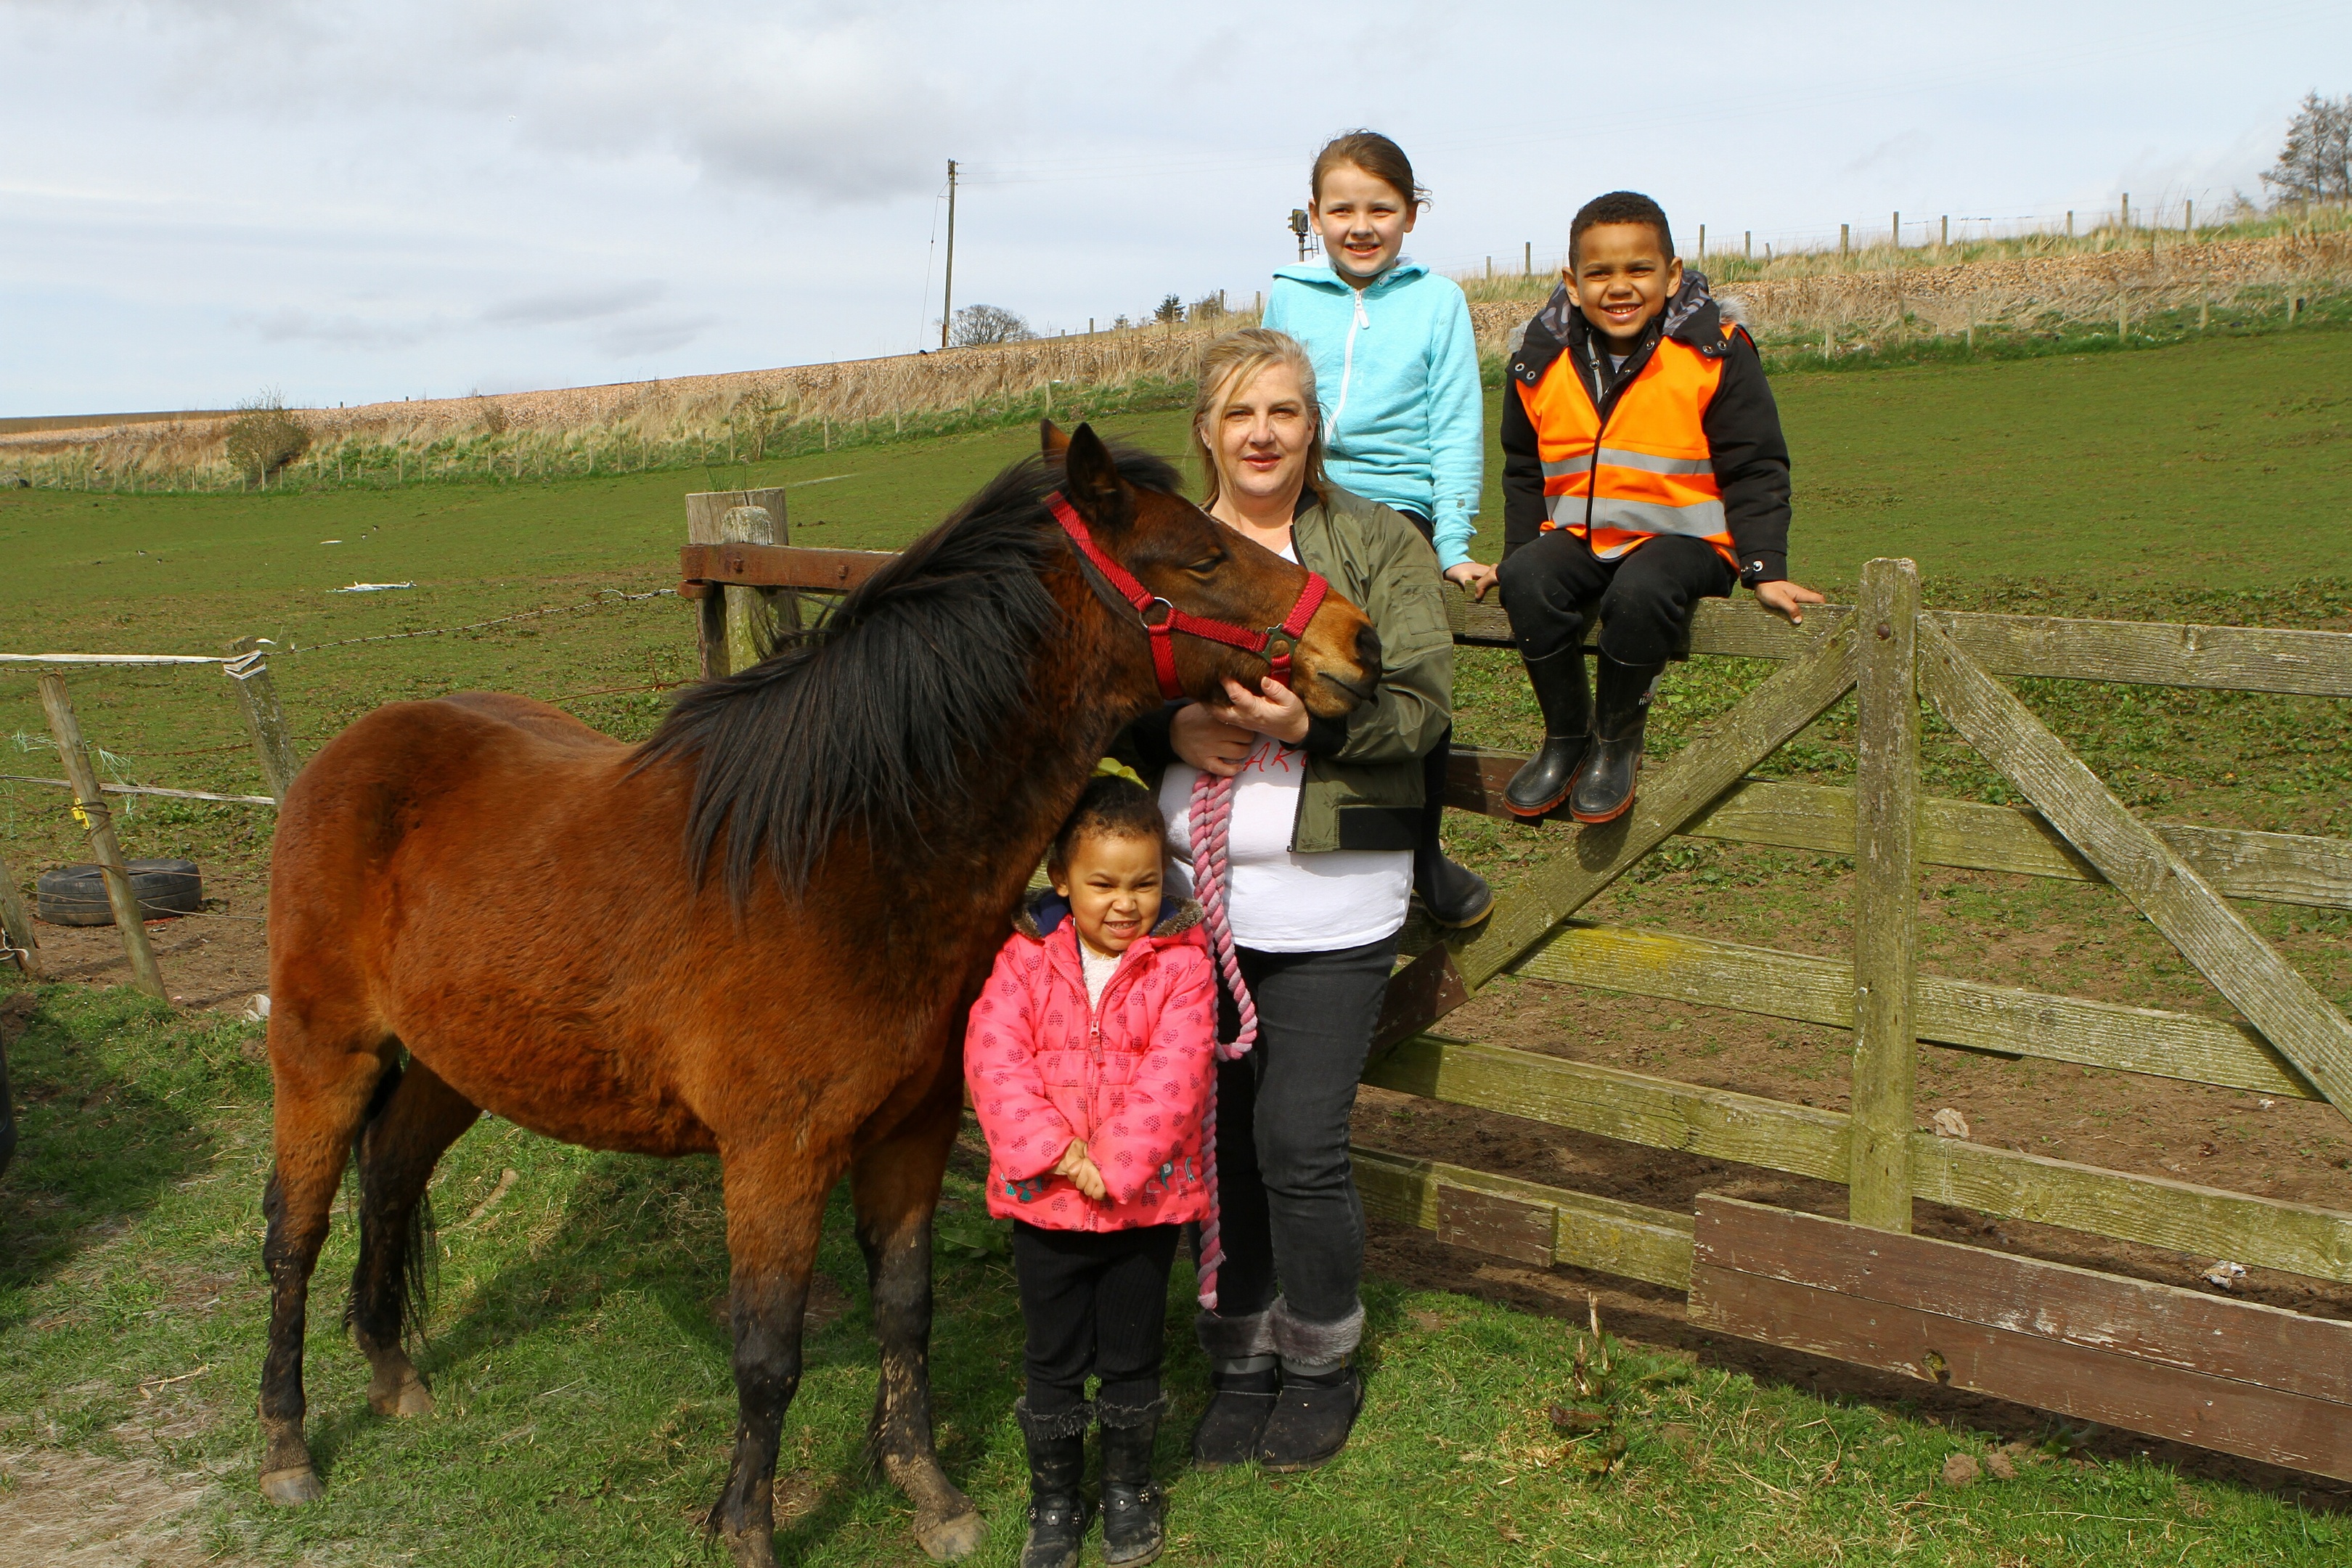 Wendy Robb with one of the horses Orchid, and helpers, Mya-Lynn Koffi (front) and Jasmine Dogan and Curtis Koffi, at the fields near Letham Mill, Arbroath.